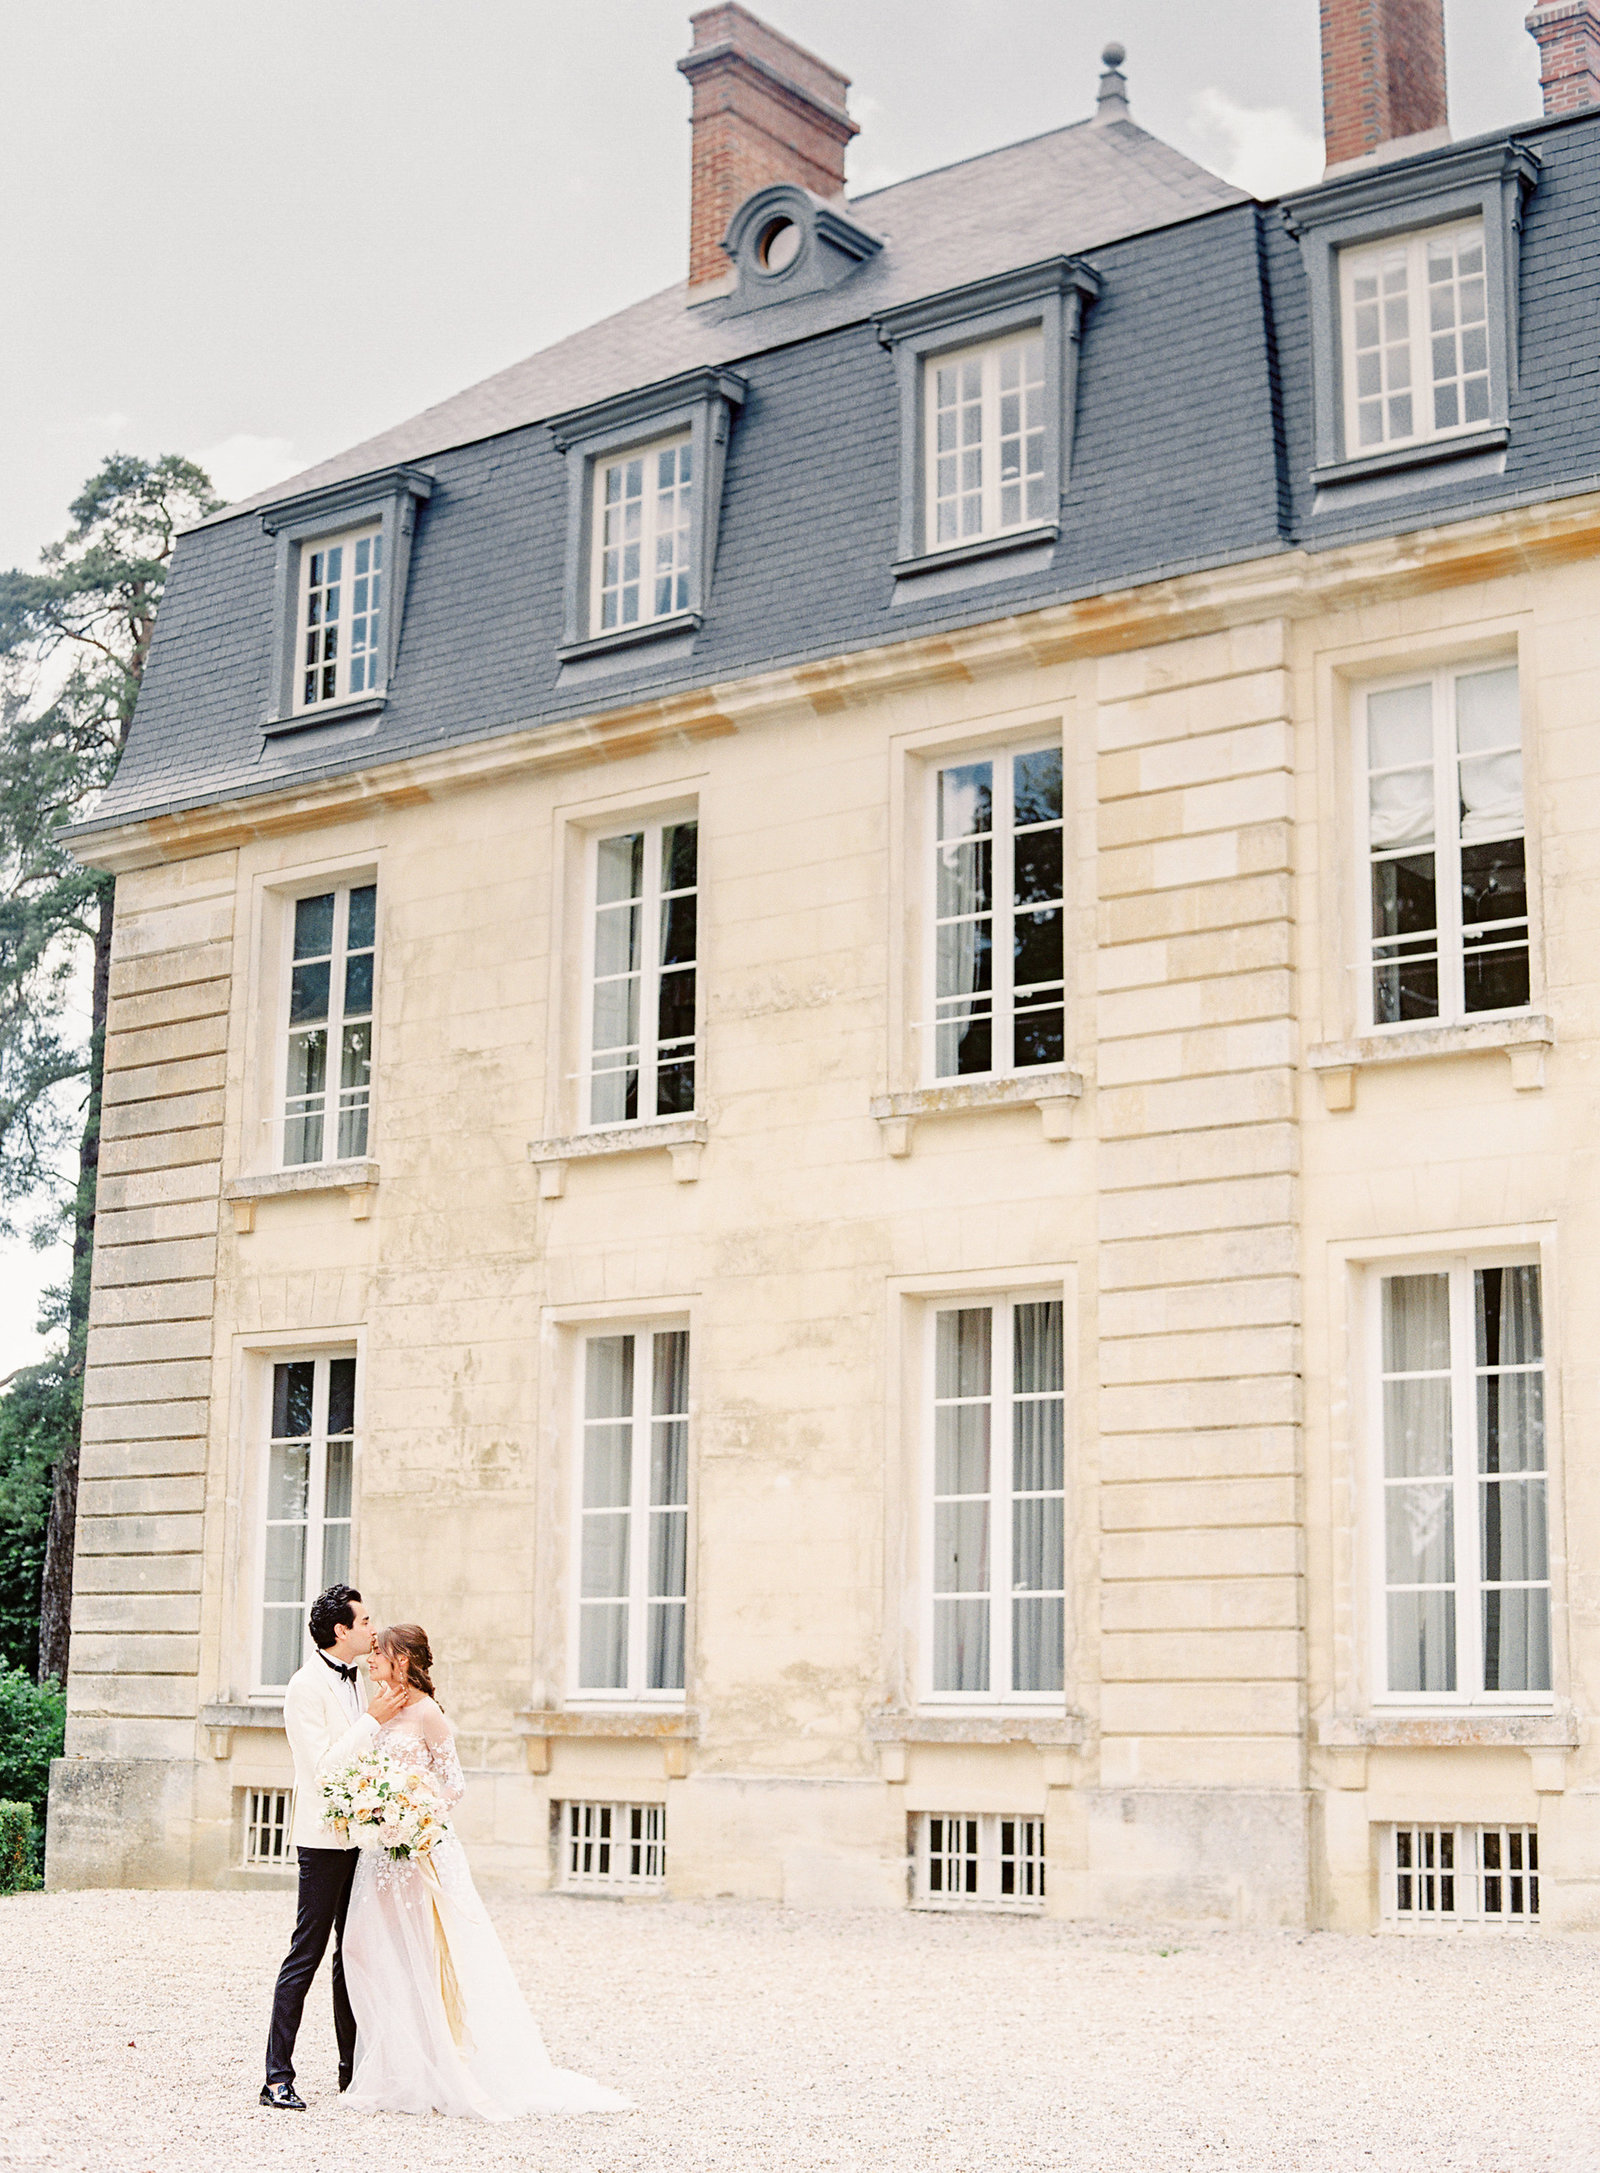 Bride and groom in front of french chateau. Groom kissing bride on forehead. Photographed by Amy Mulder Photography